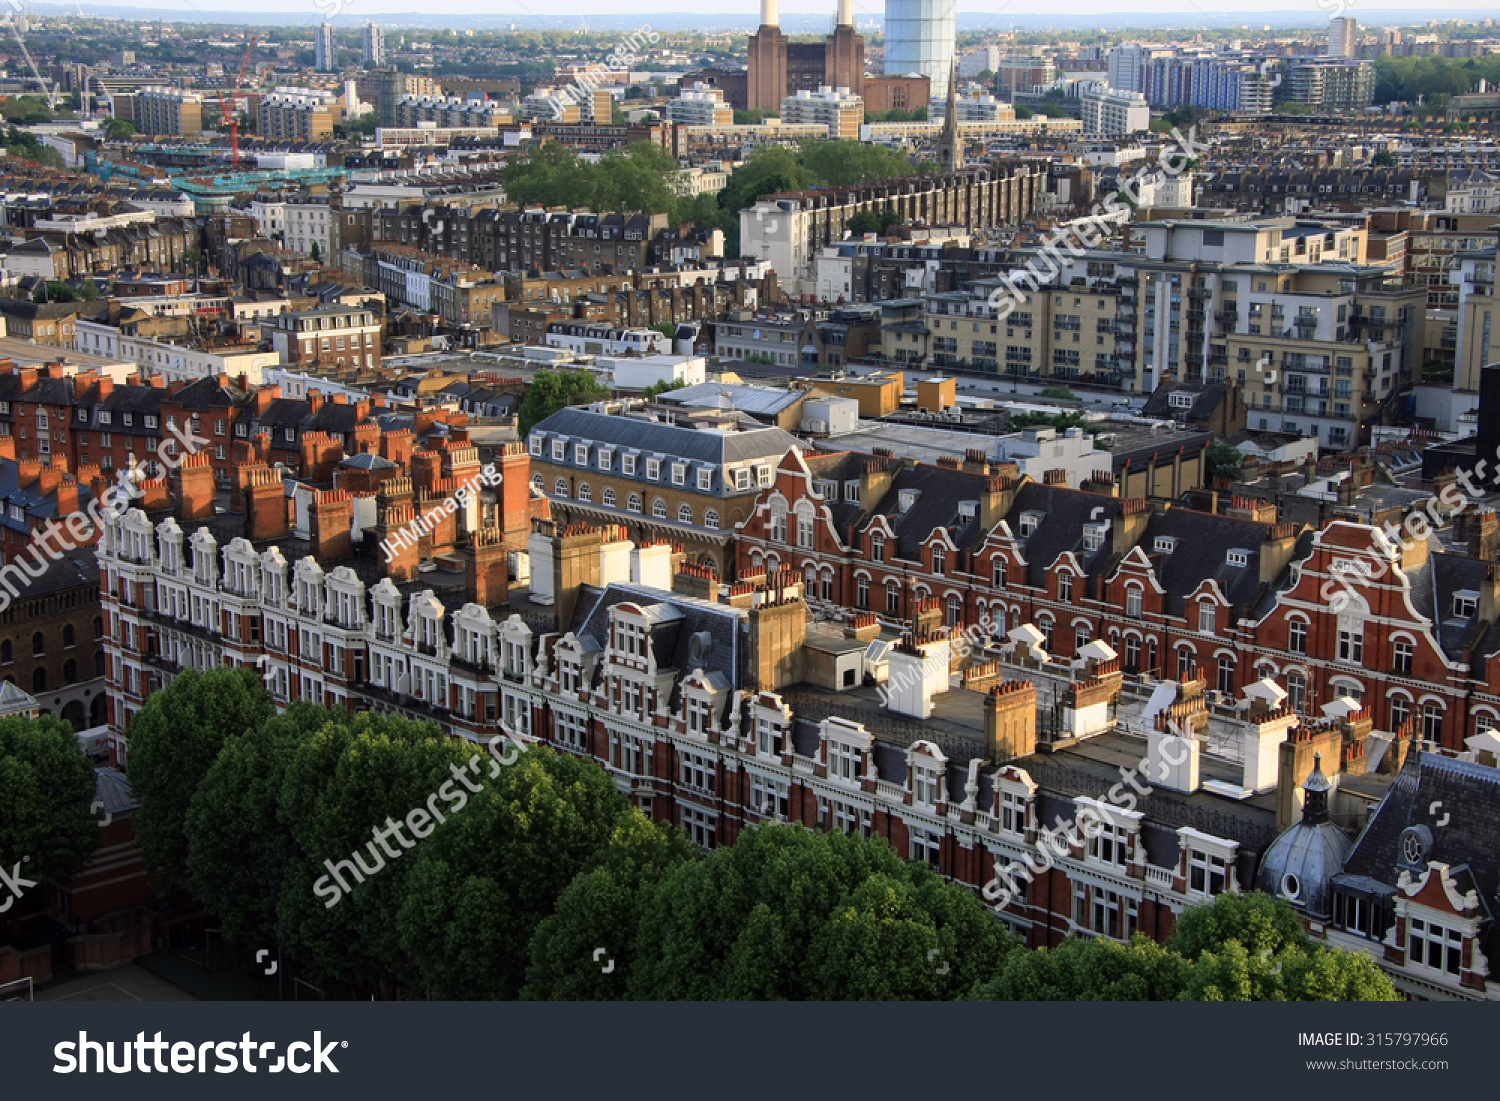 London Housing from the air #315797966